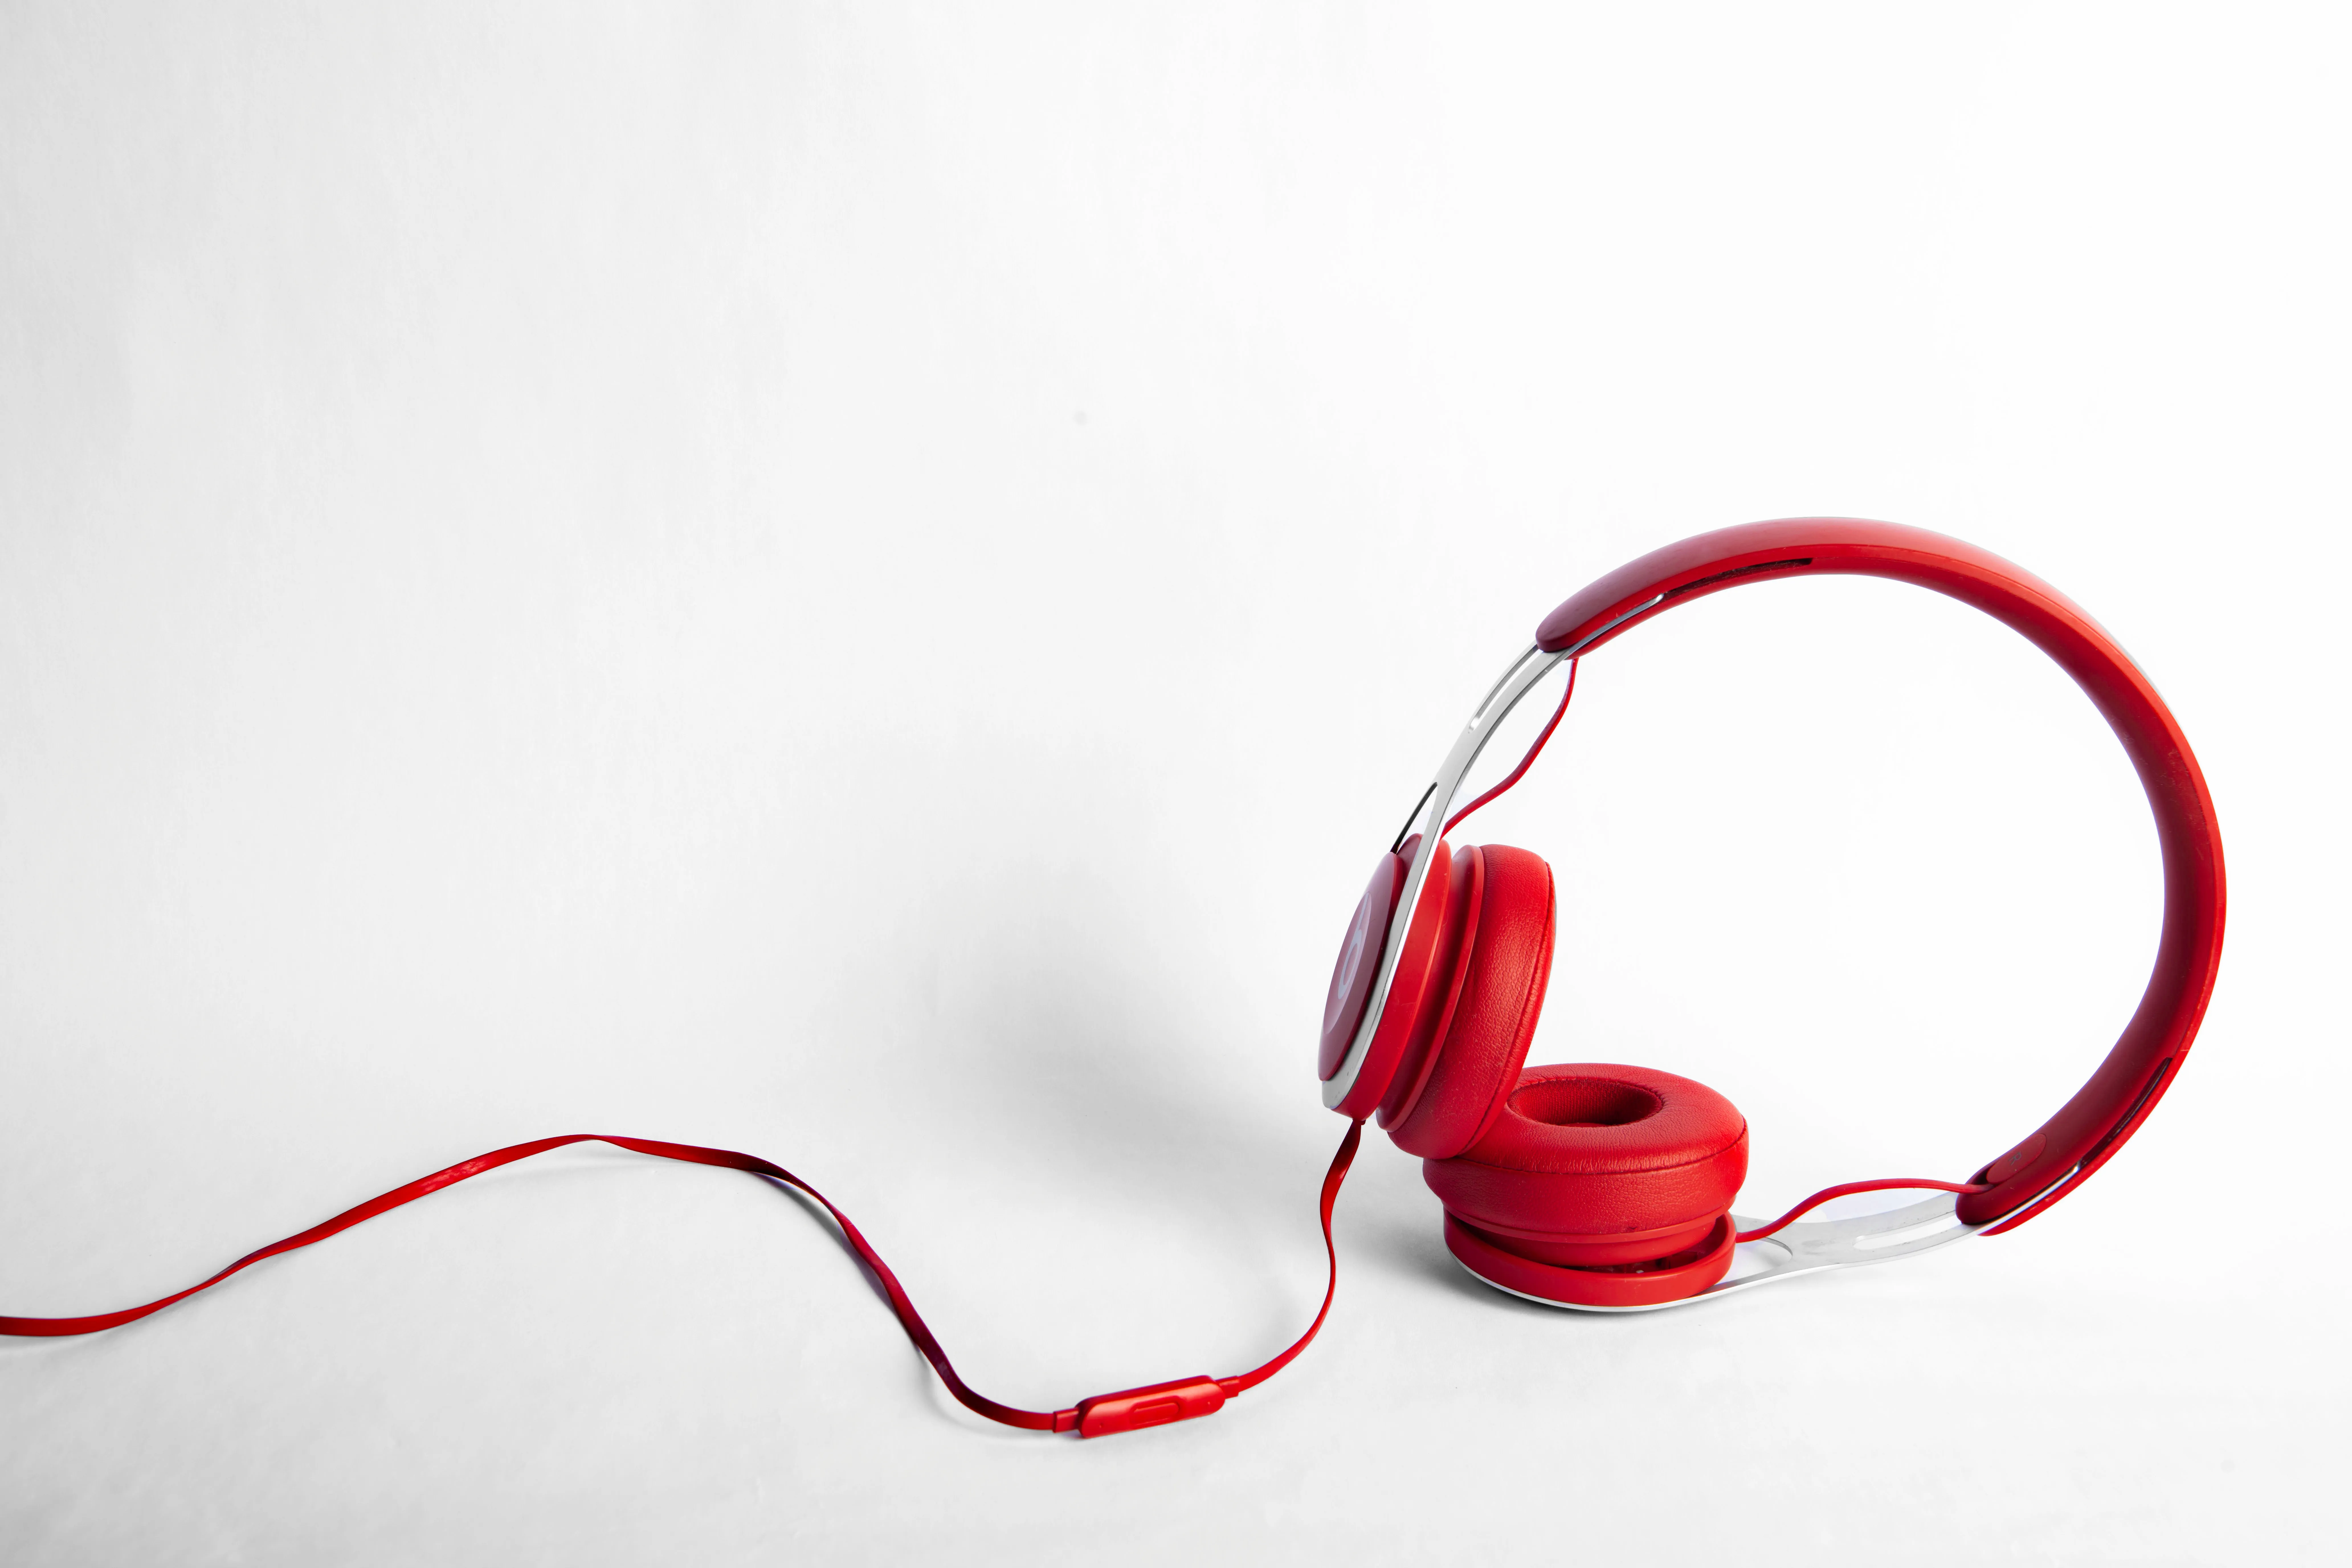 Red wired noise cancelling headset by Yarenci Hdz - unsplash.com